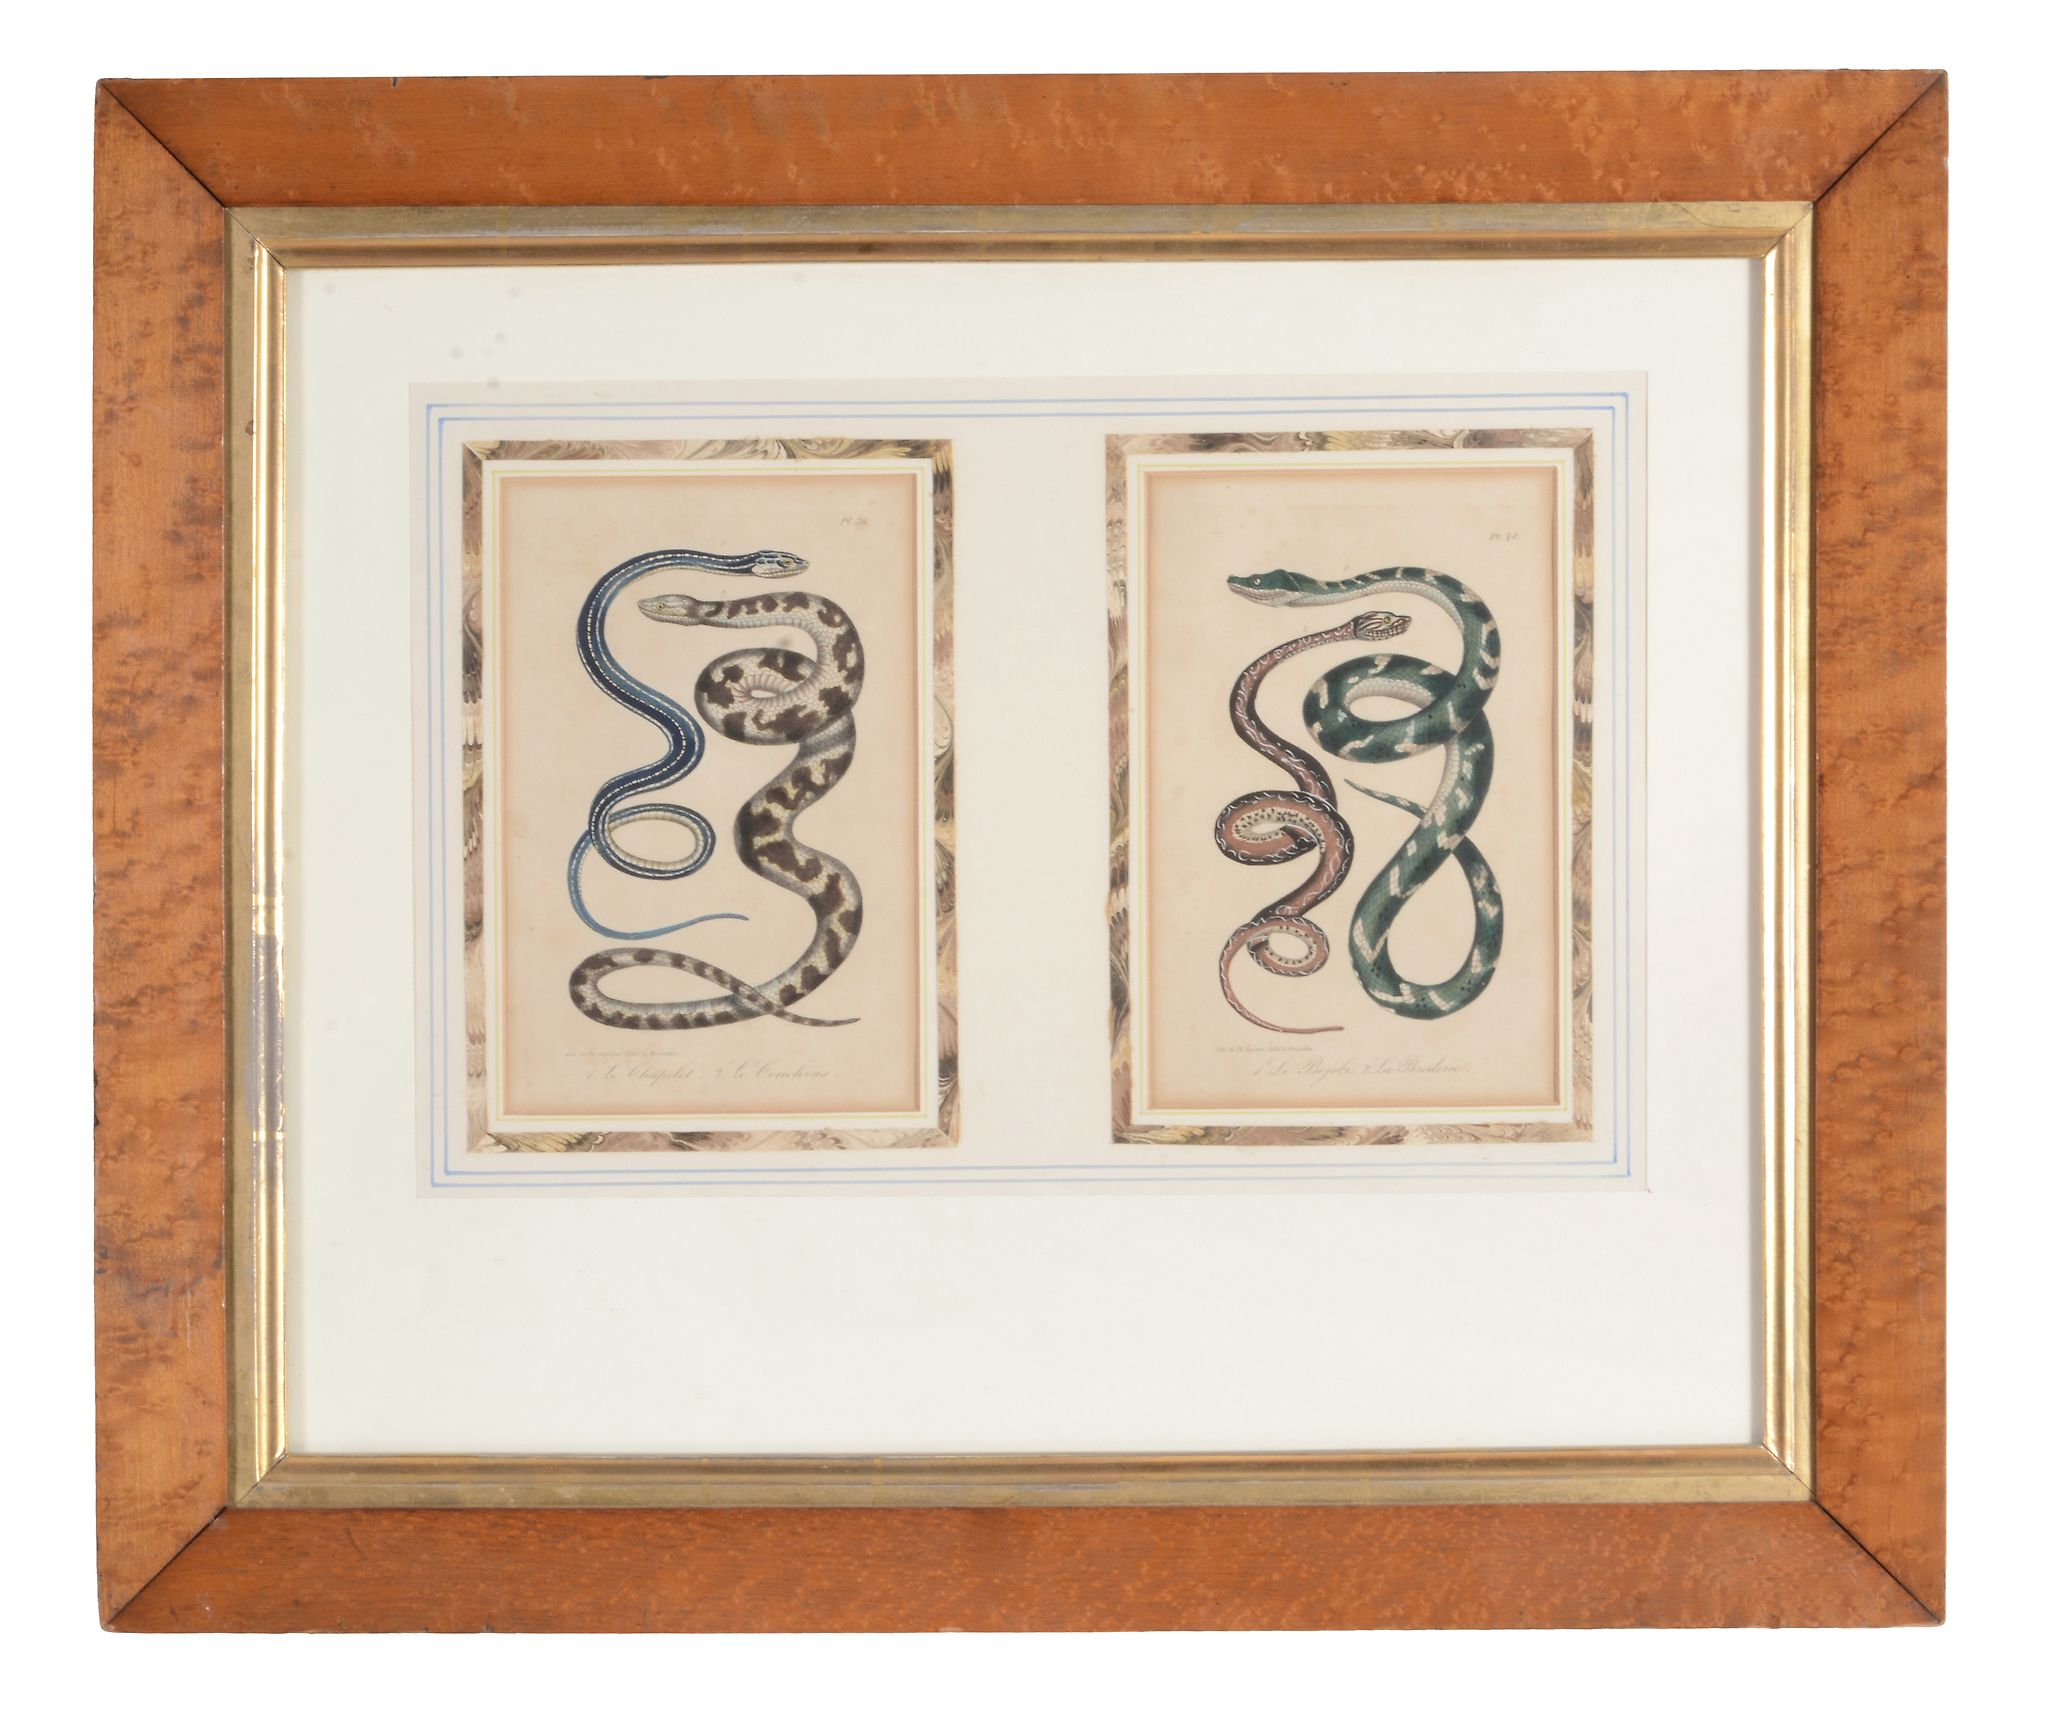 Thomas Lejeune (fl.1828-1836) - A group of four plates of snakes Lithographs, with hand colouring - Image 4 of 4